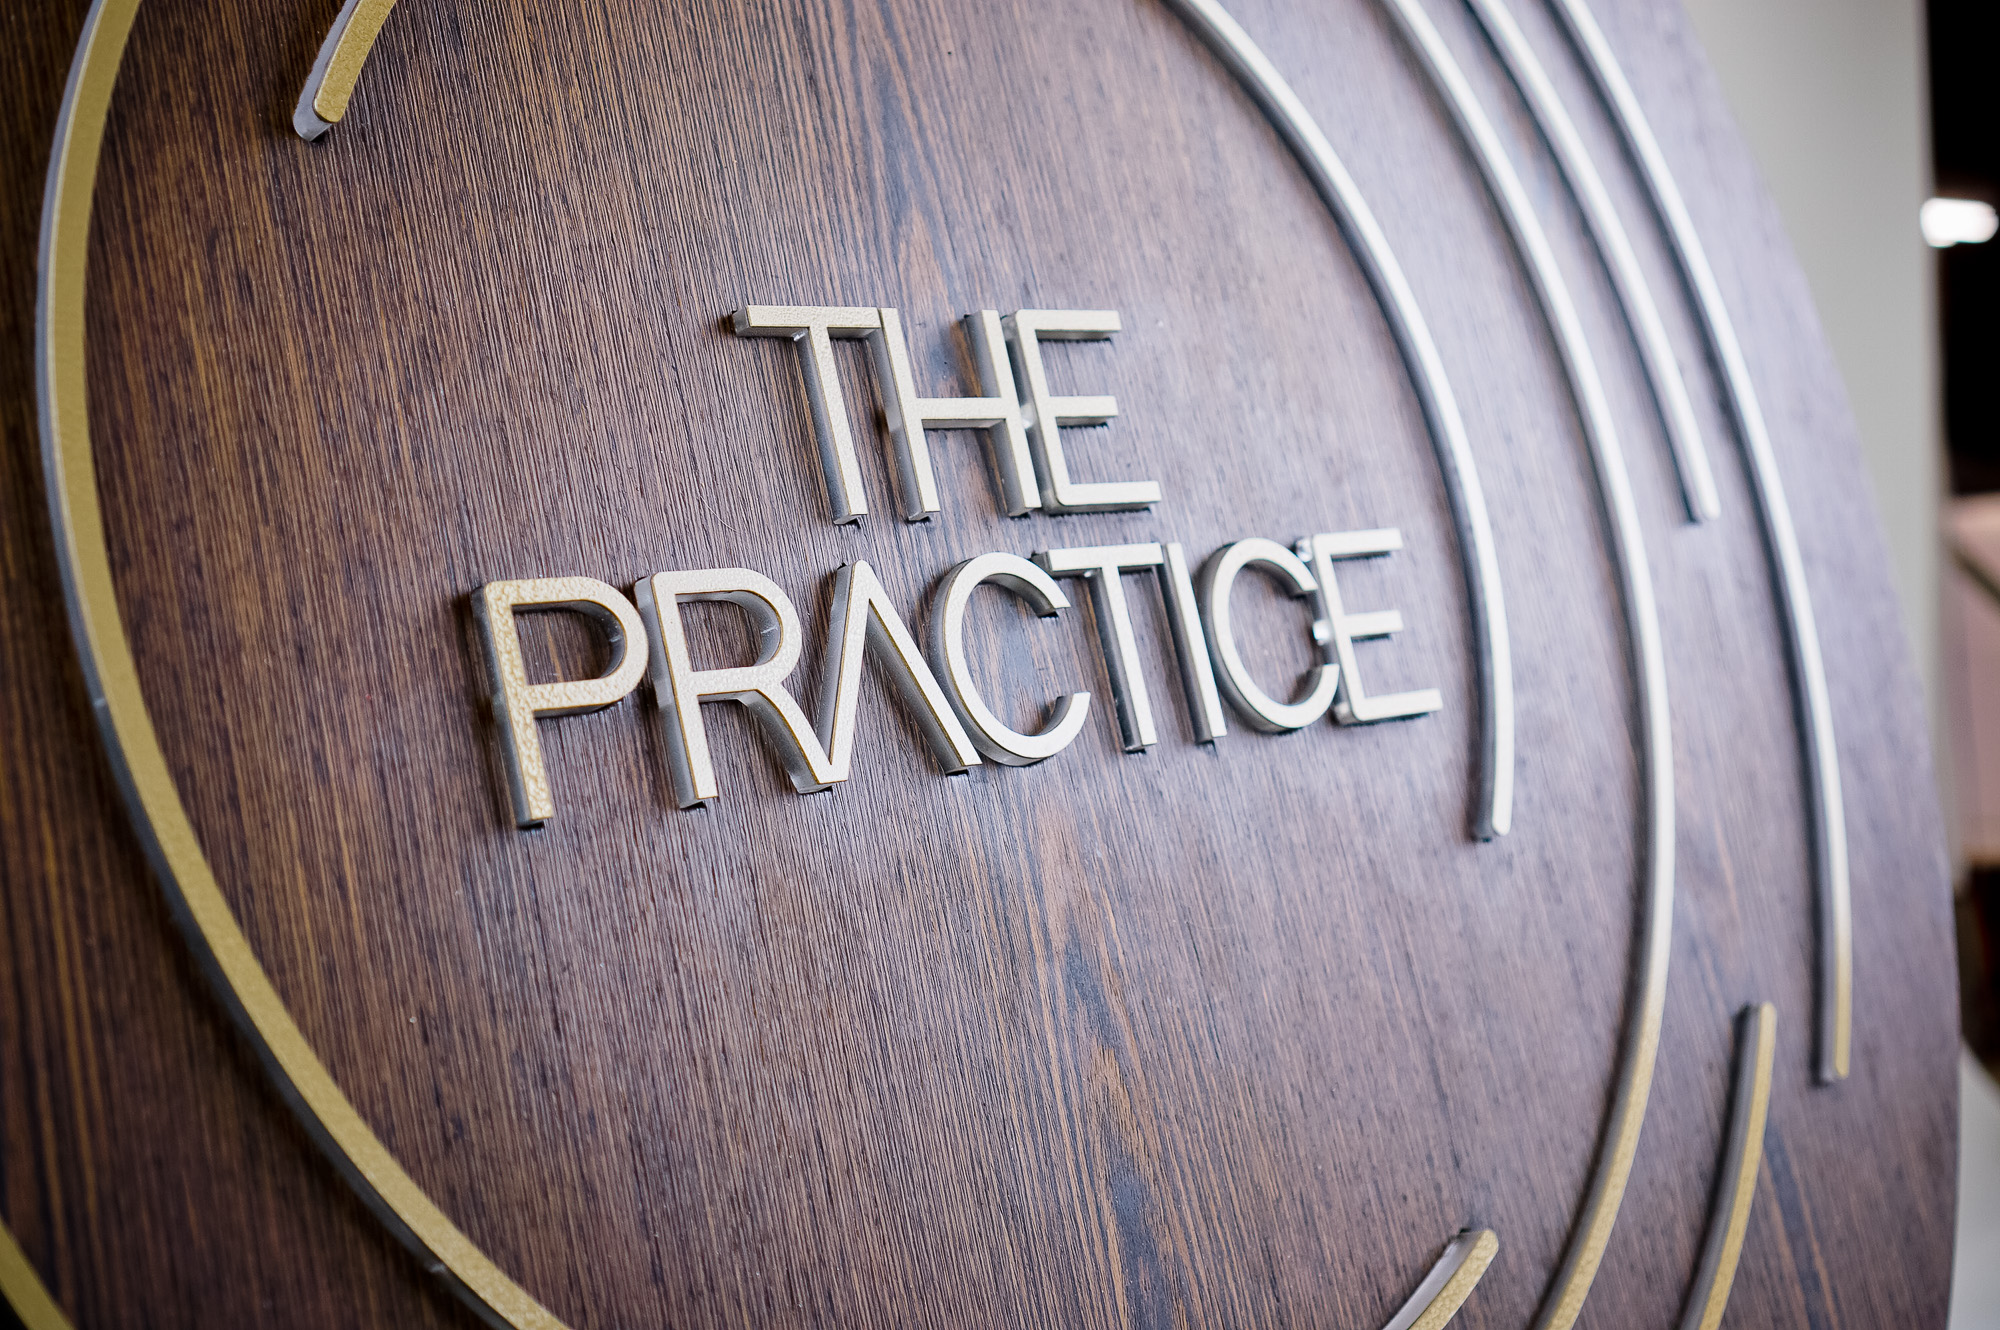 Illuminated dark wood and brass sign for The Practice, a yoga studio at Newtown Athletic Club, a premiere family fitness and wellness center serving residents of Newtown, PA